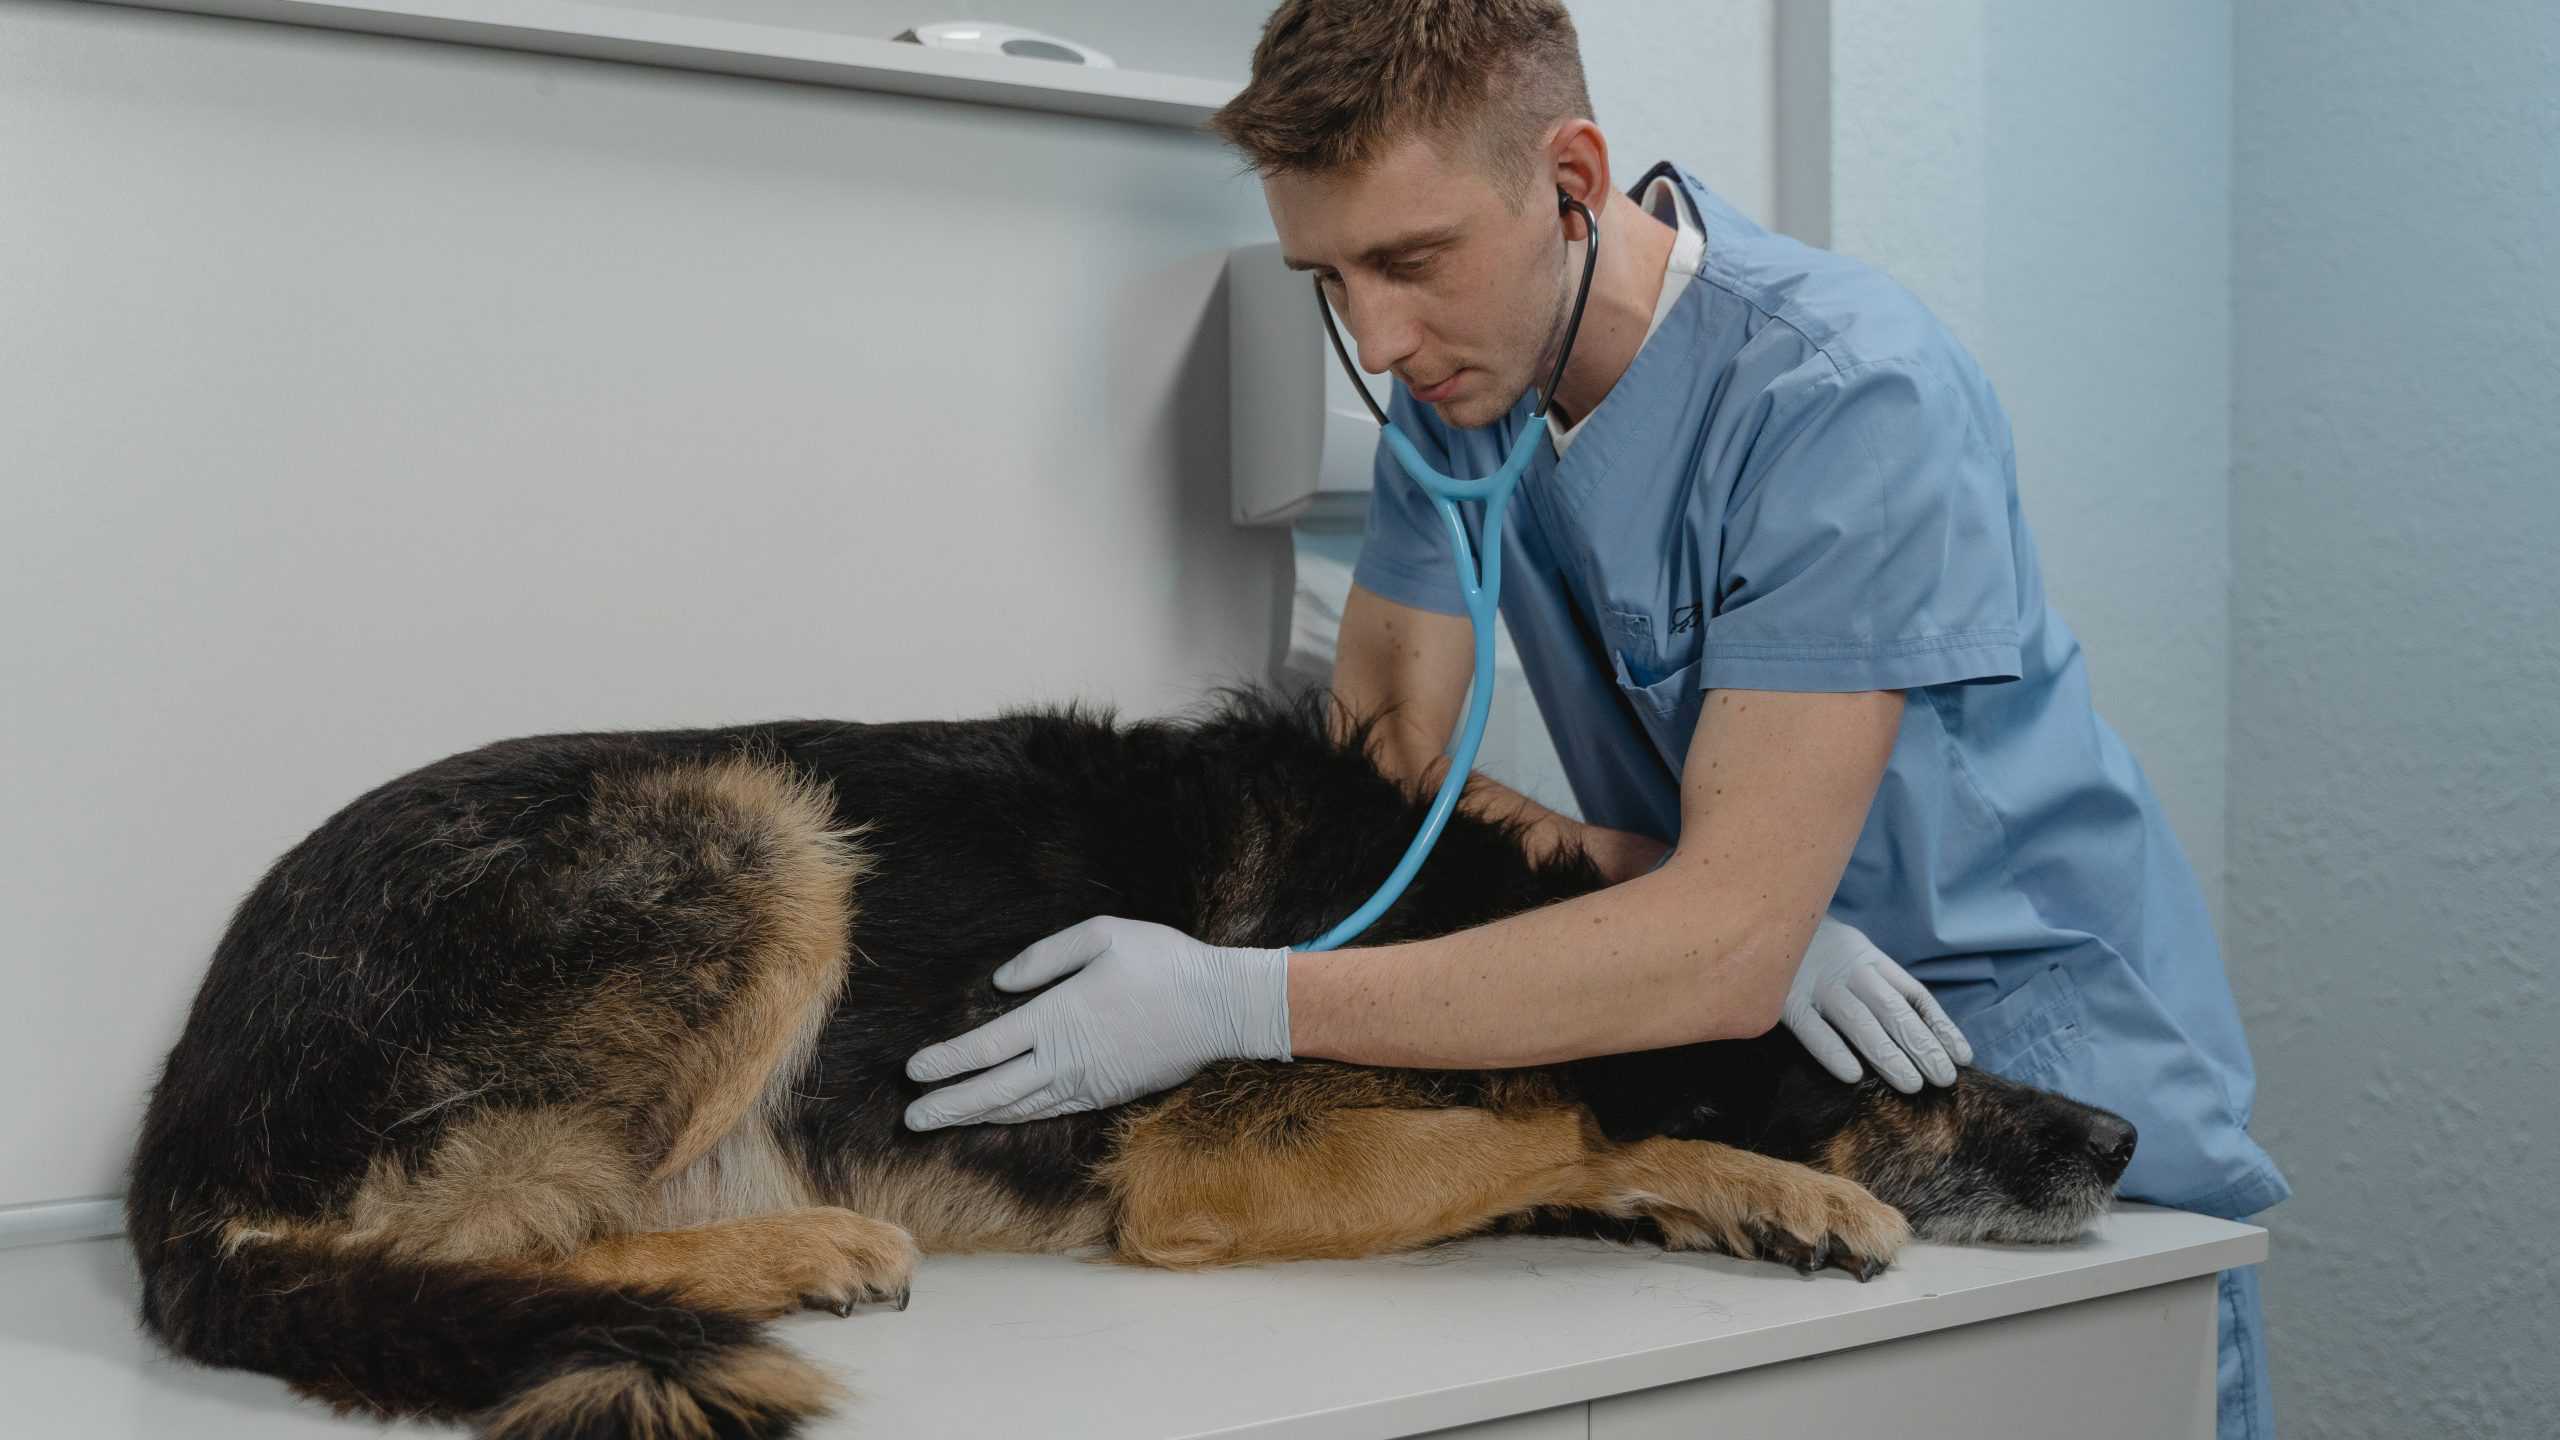 A vet examines a dog with a stethoscope.